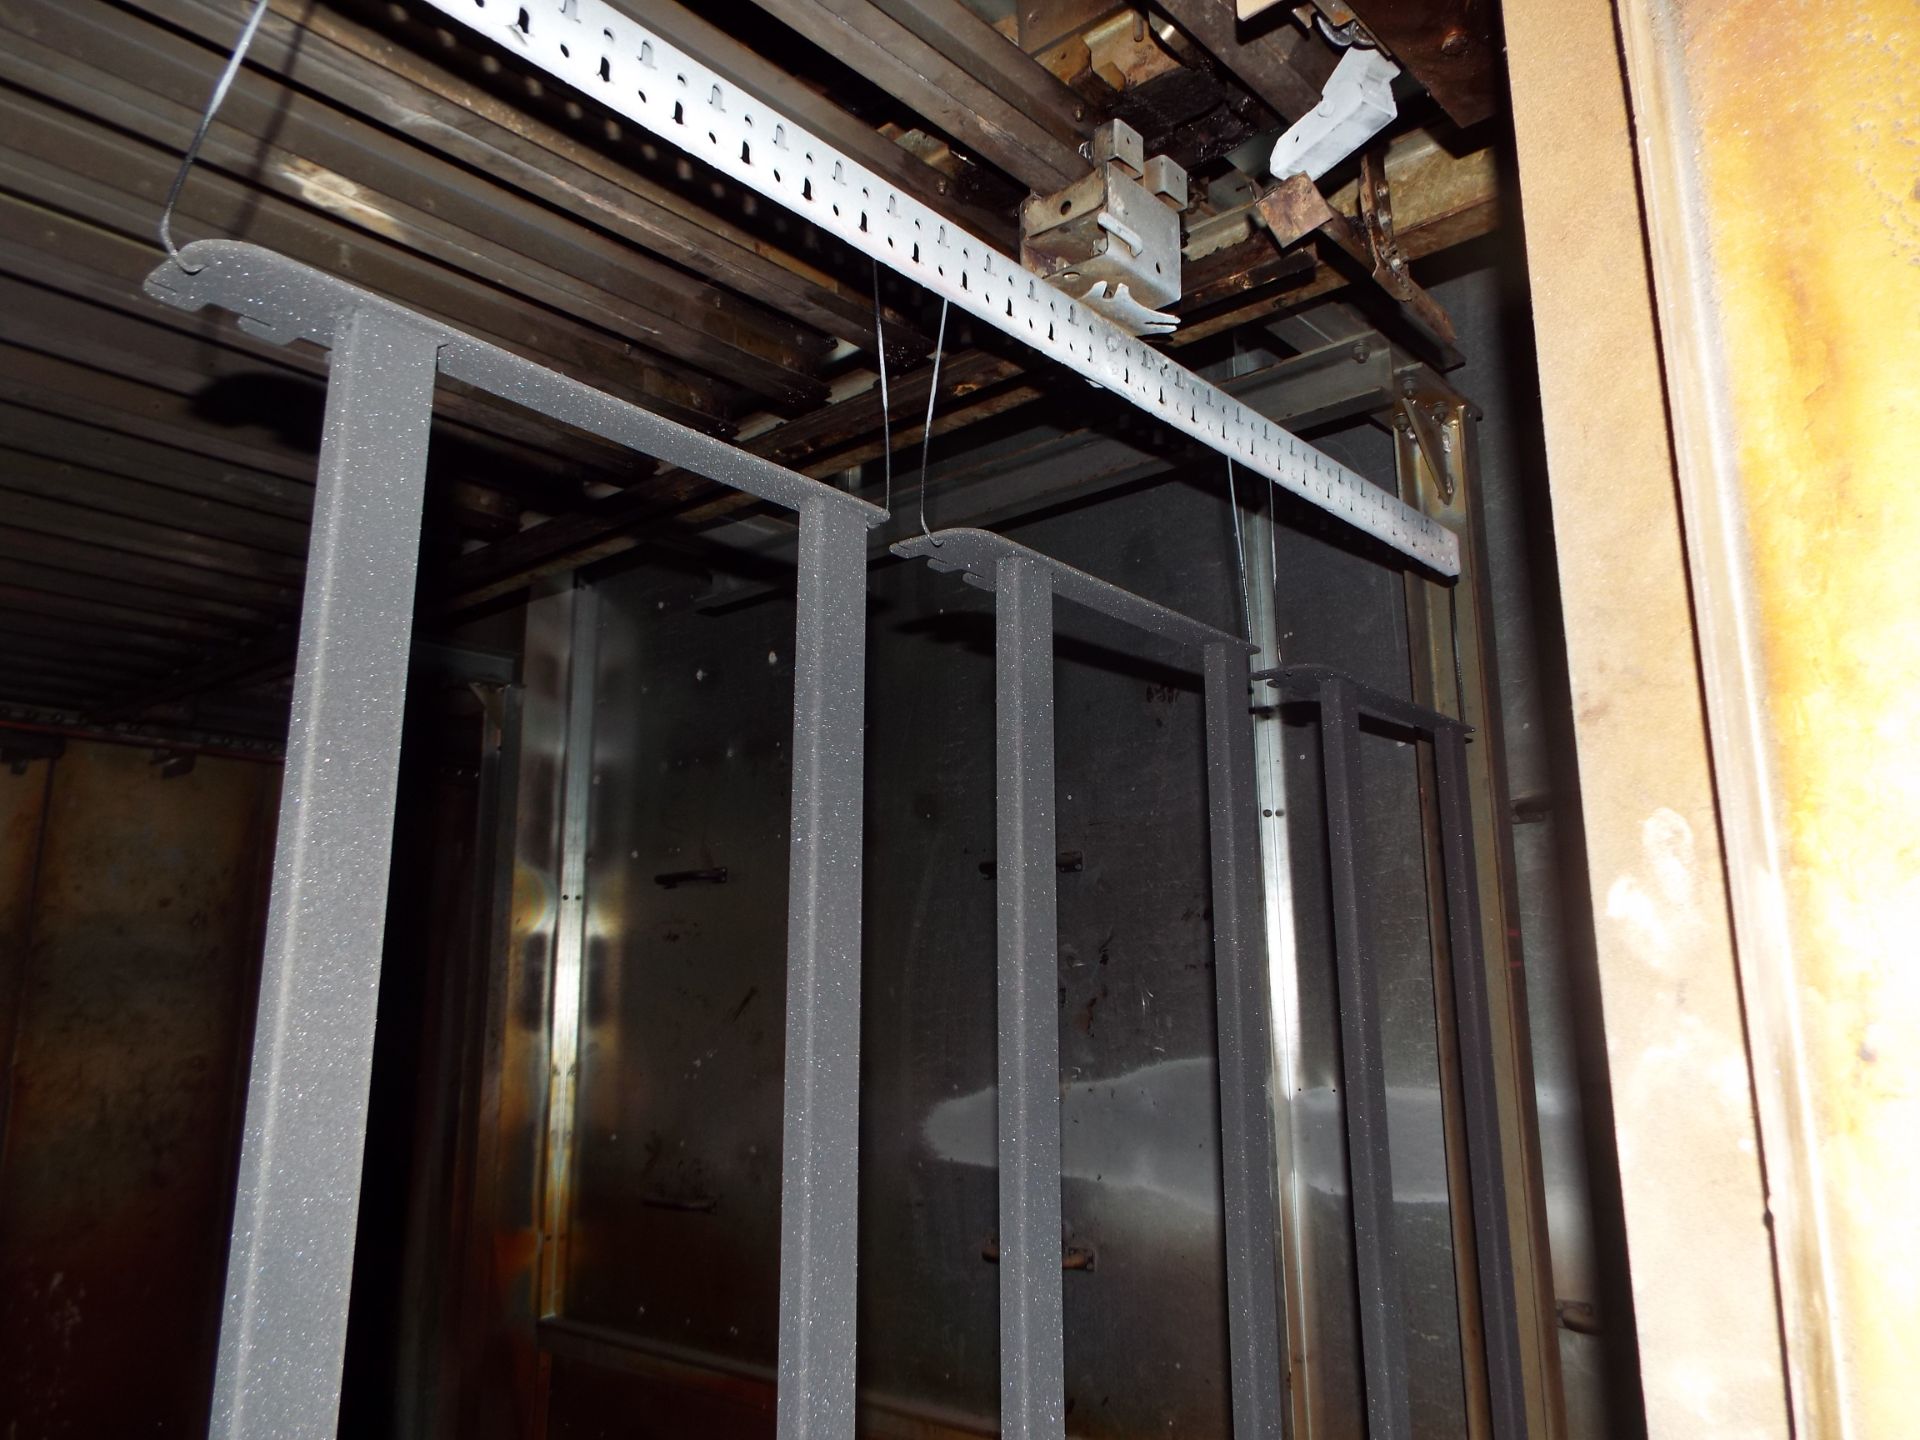 Shuttle Type Fan Assisted Curing Oven & Infeed/Outfeed Overhead Conveyor - Image 6 of 8